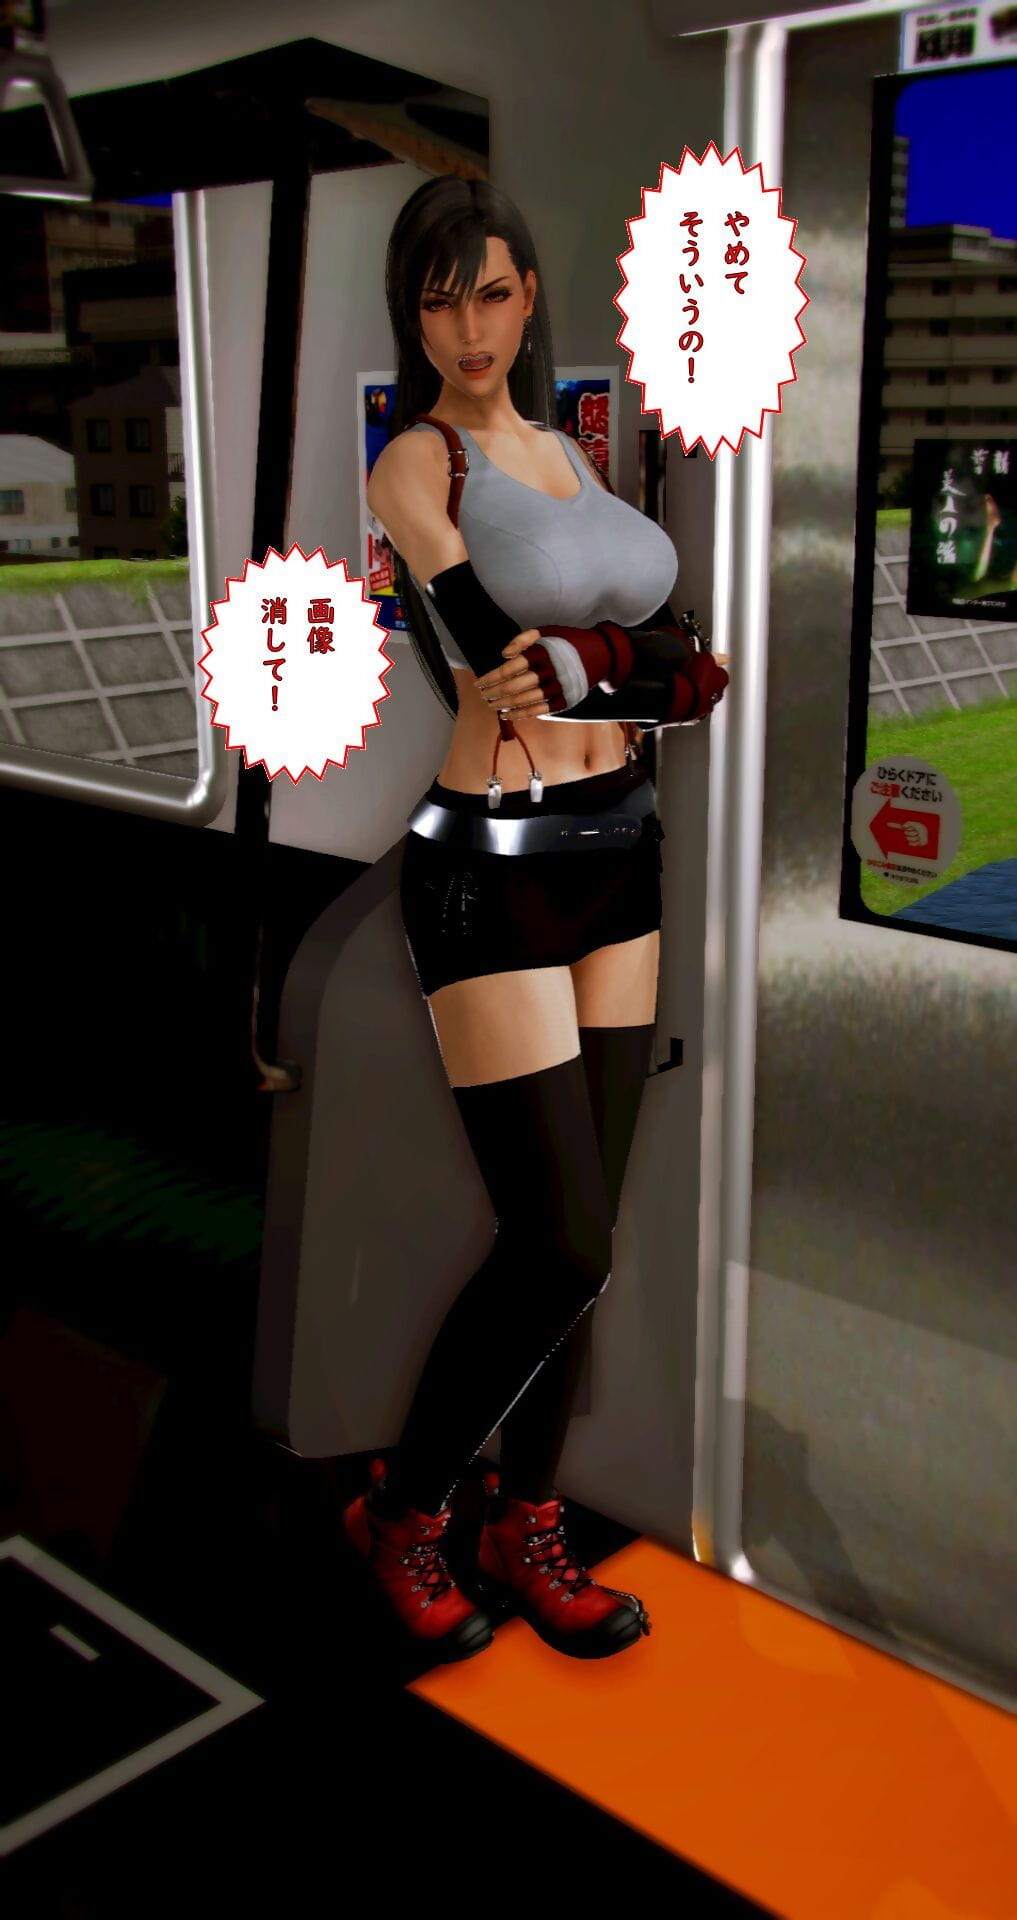 Tifa insusceptible to Underpass